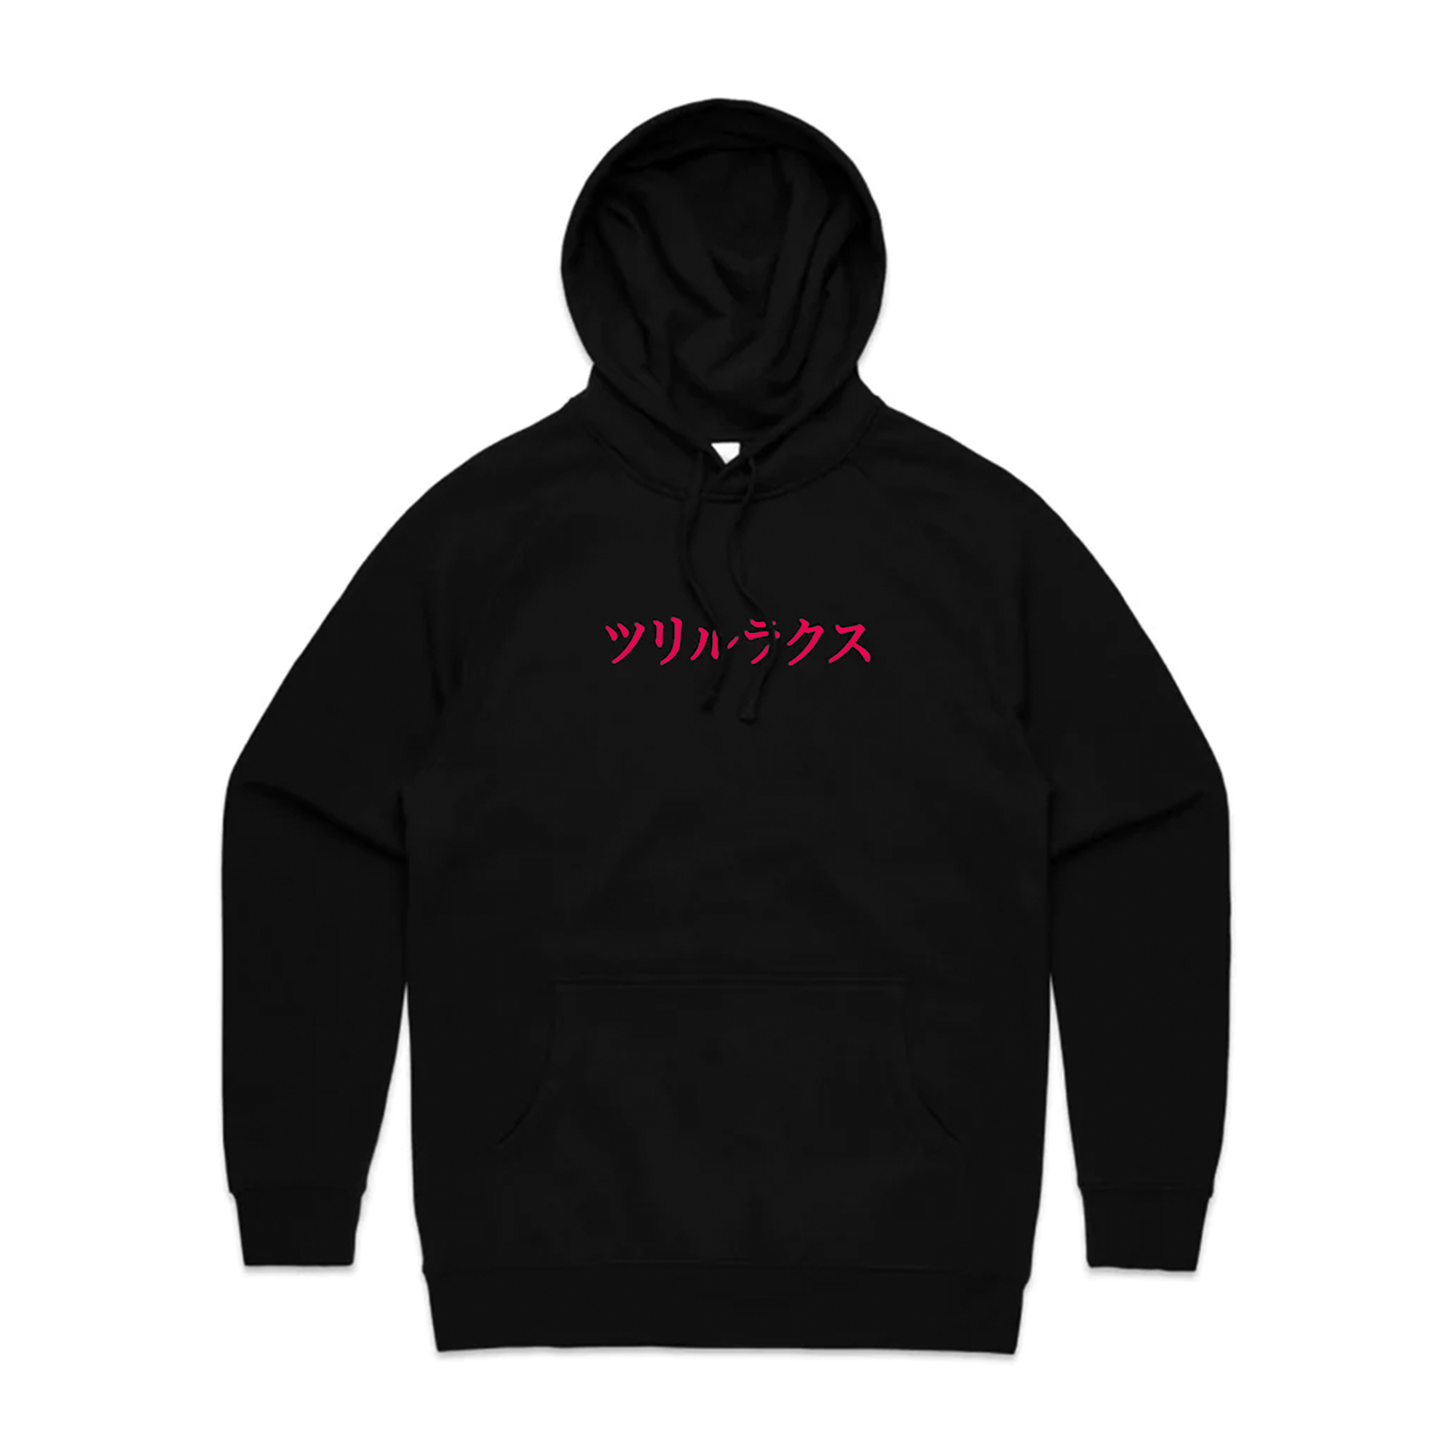 Limited Edition Racer Girl Anime Black Hoodie Front